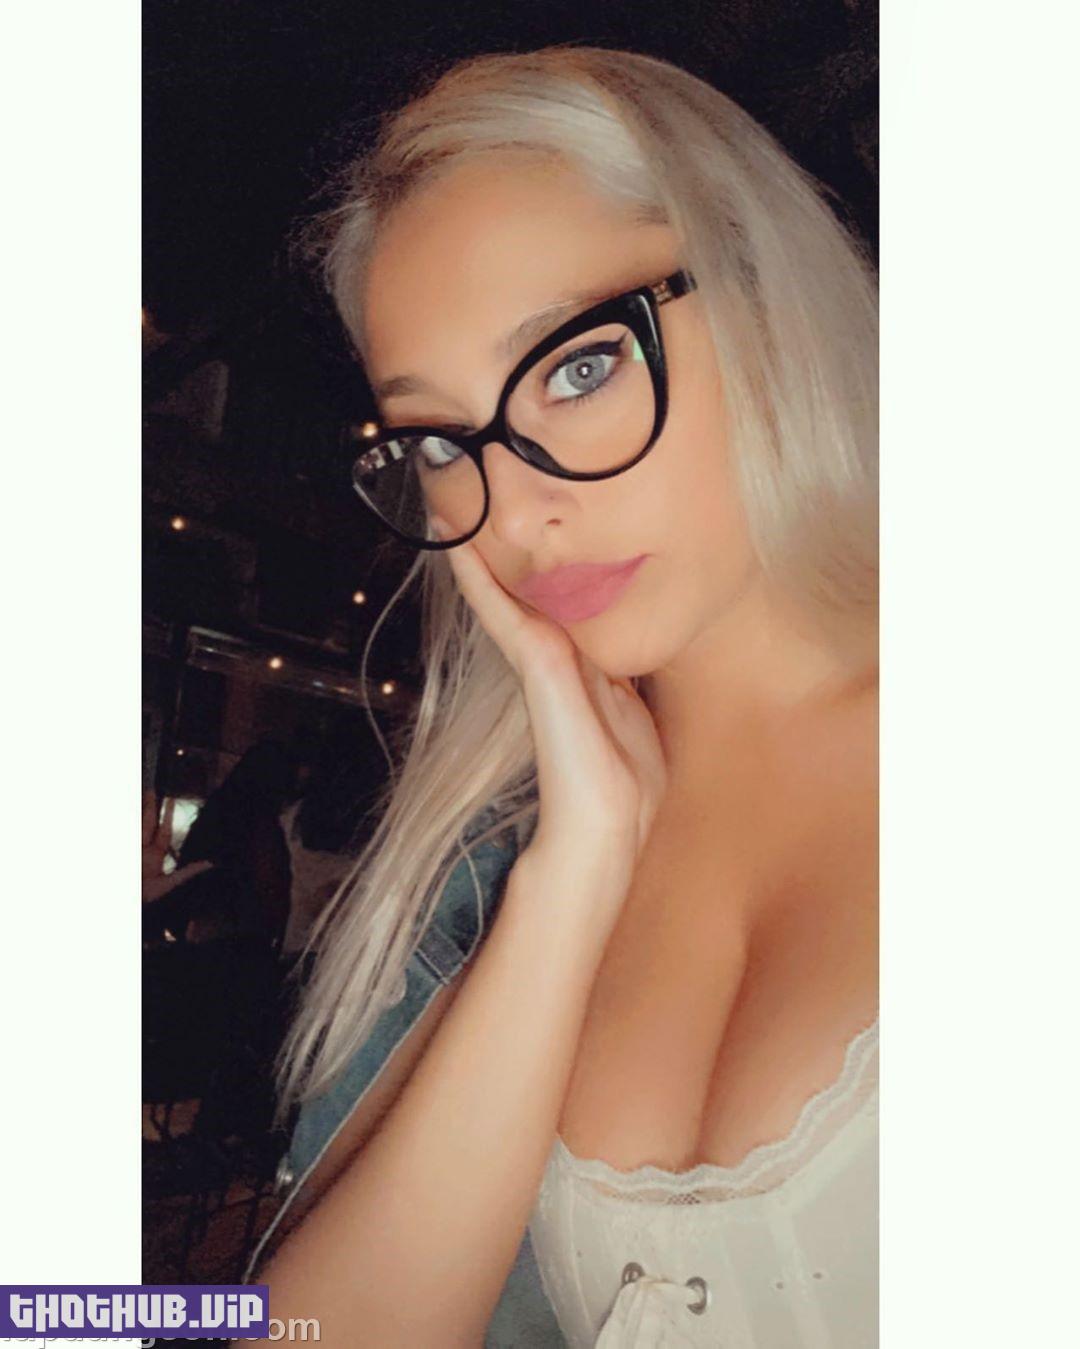 1661311357 336 Xhulia Nico %E2%80%93 Busty Blond With Glasses